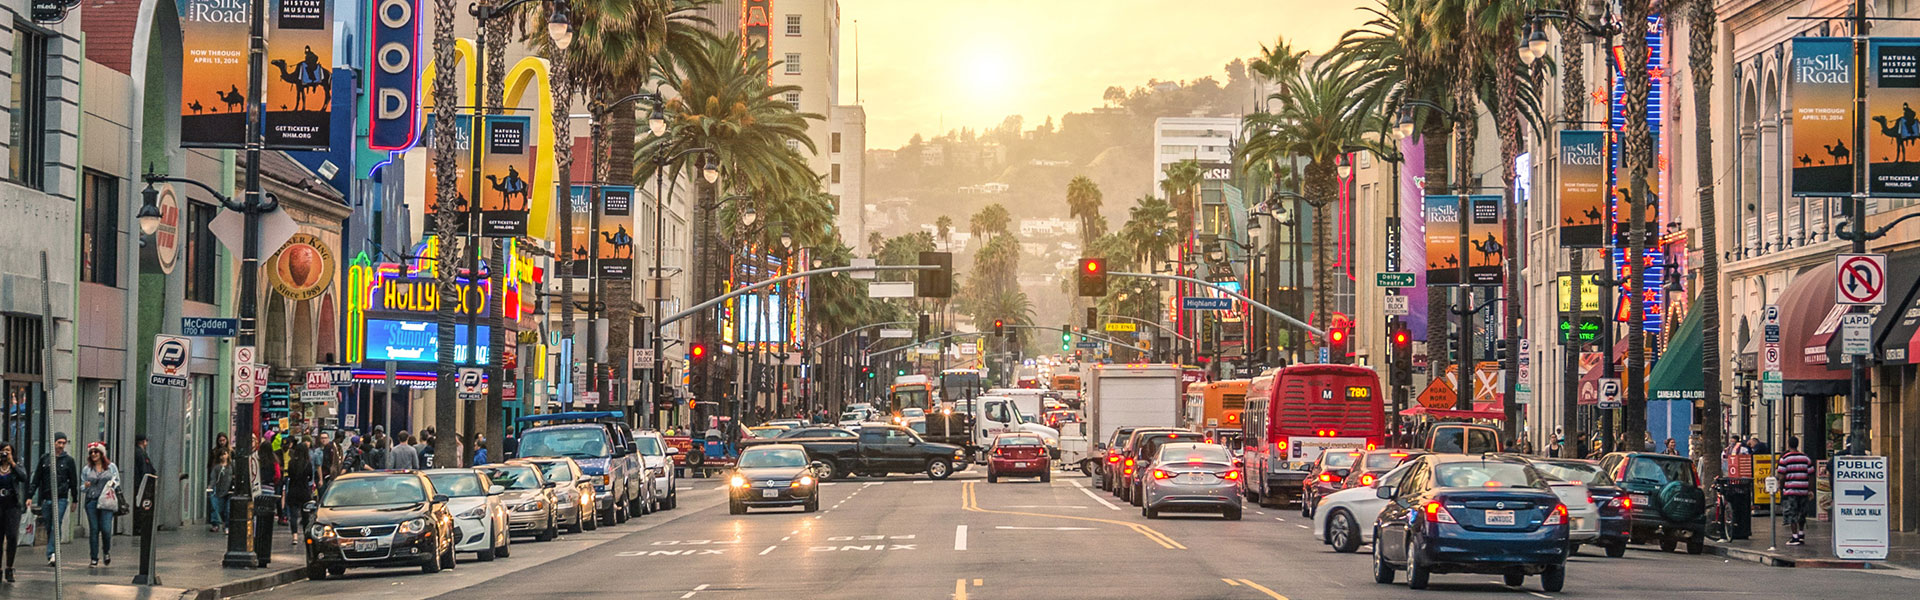 Los Angeles iStock Photo ID 468040530 by ViewApart